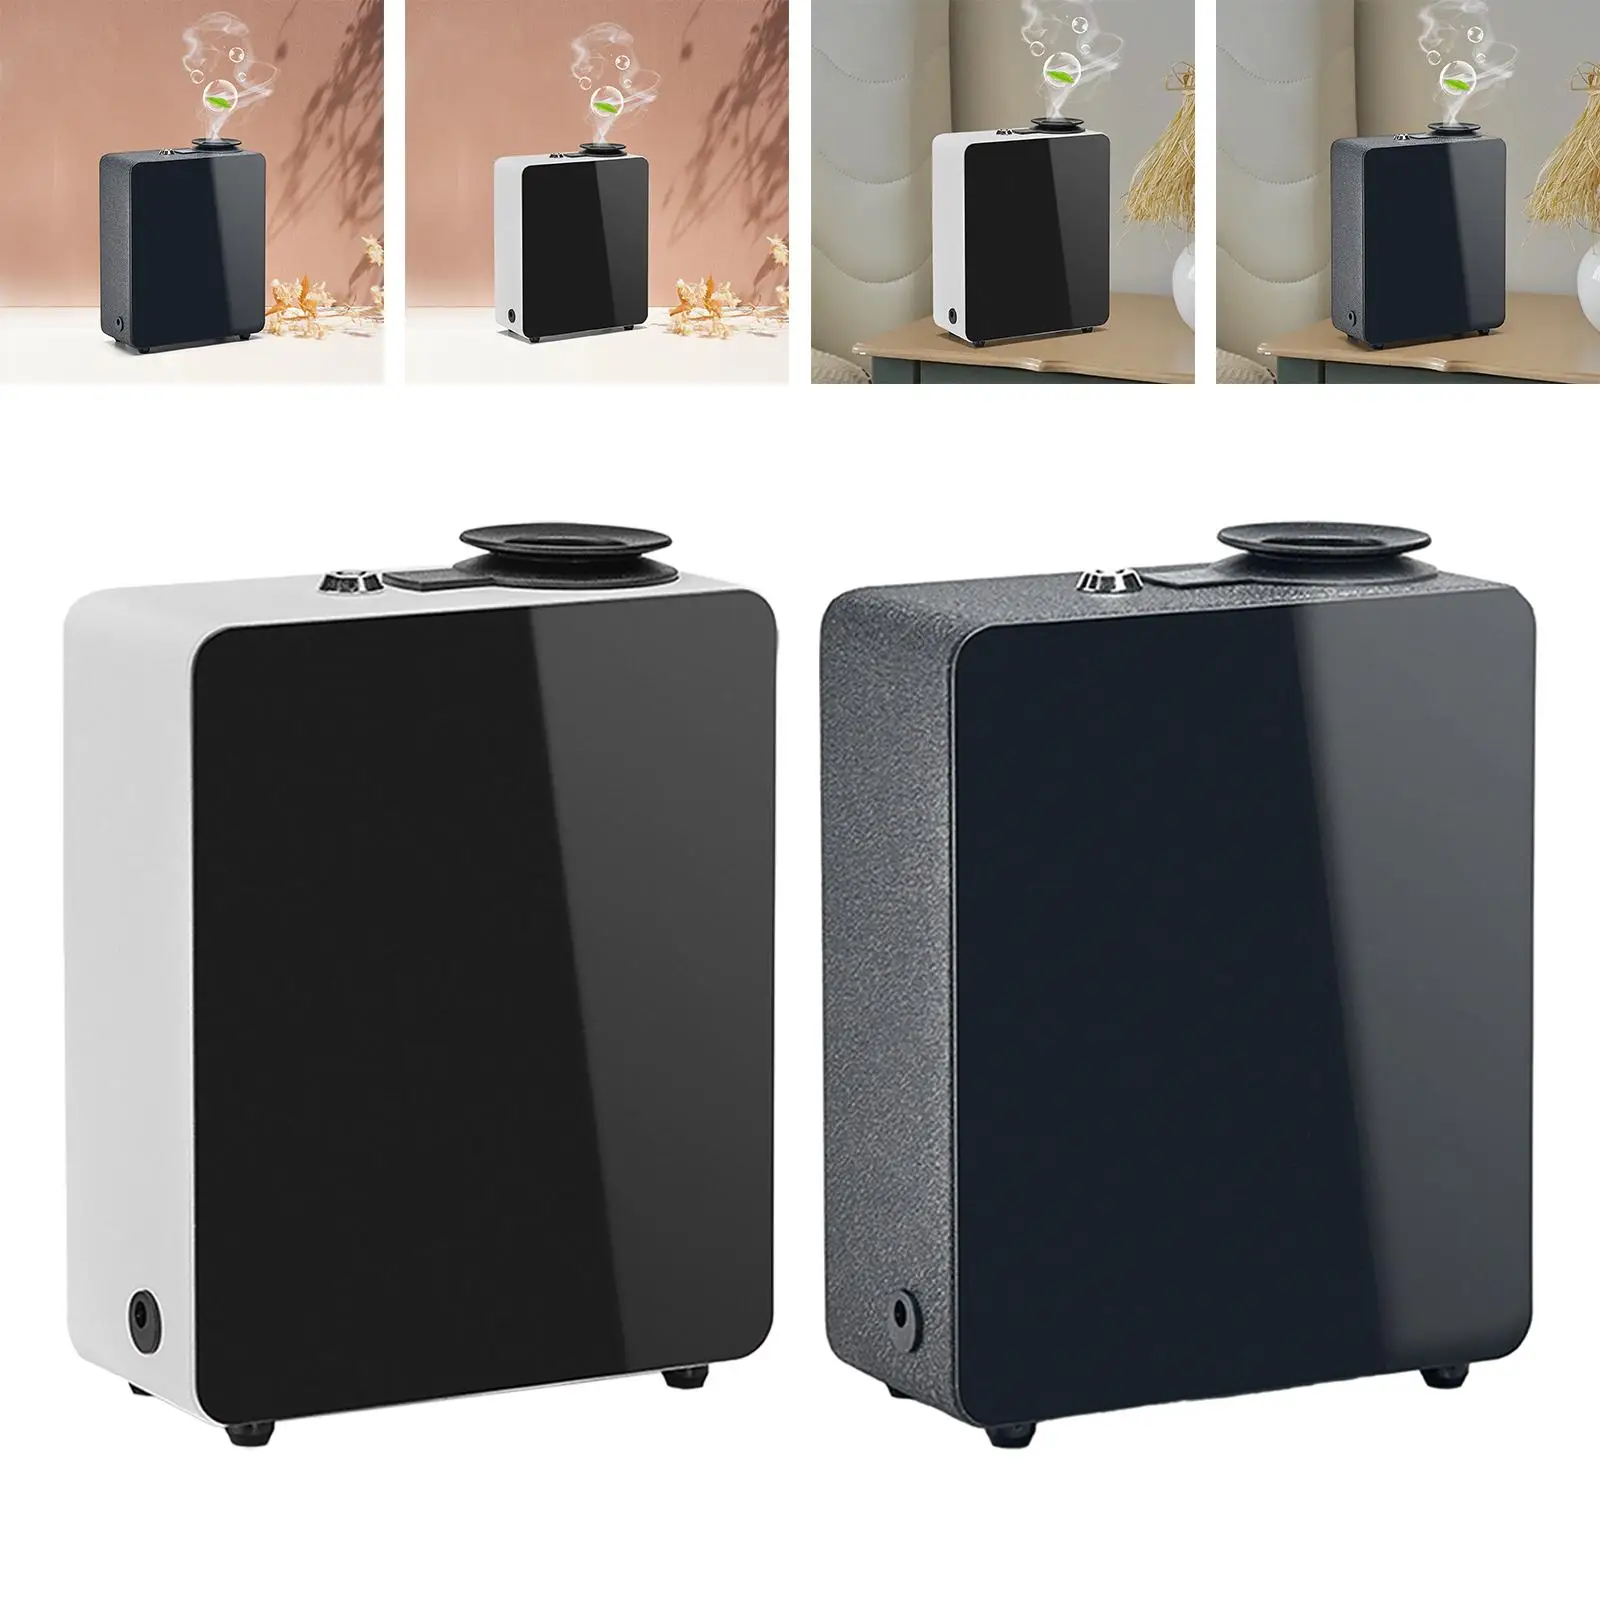 Diffusers for Essential Oils Home Fragrance Aroma Diffuser for Nursery Dorm